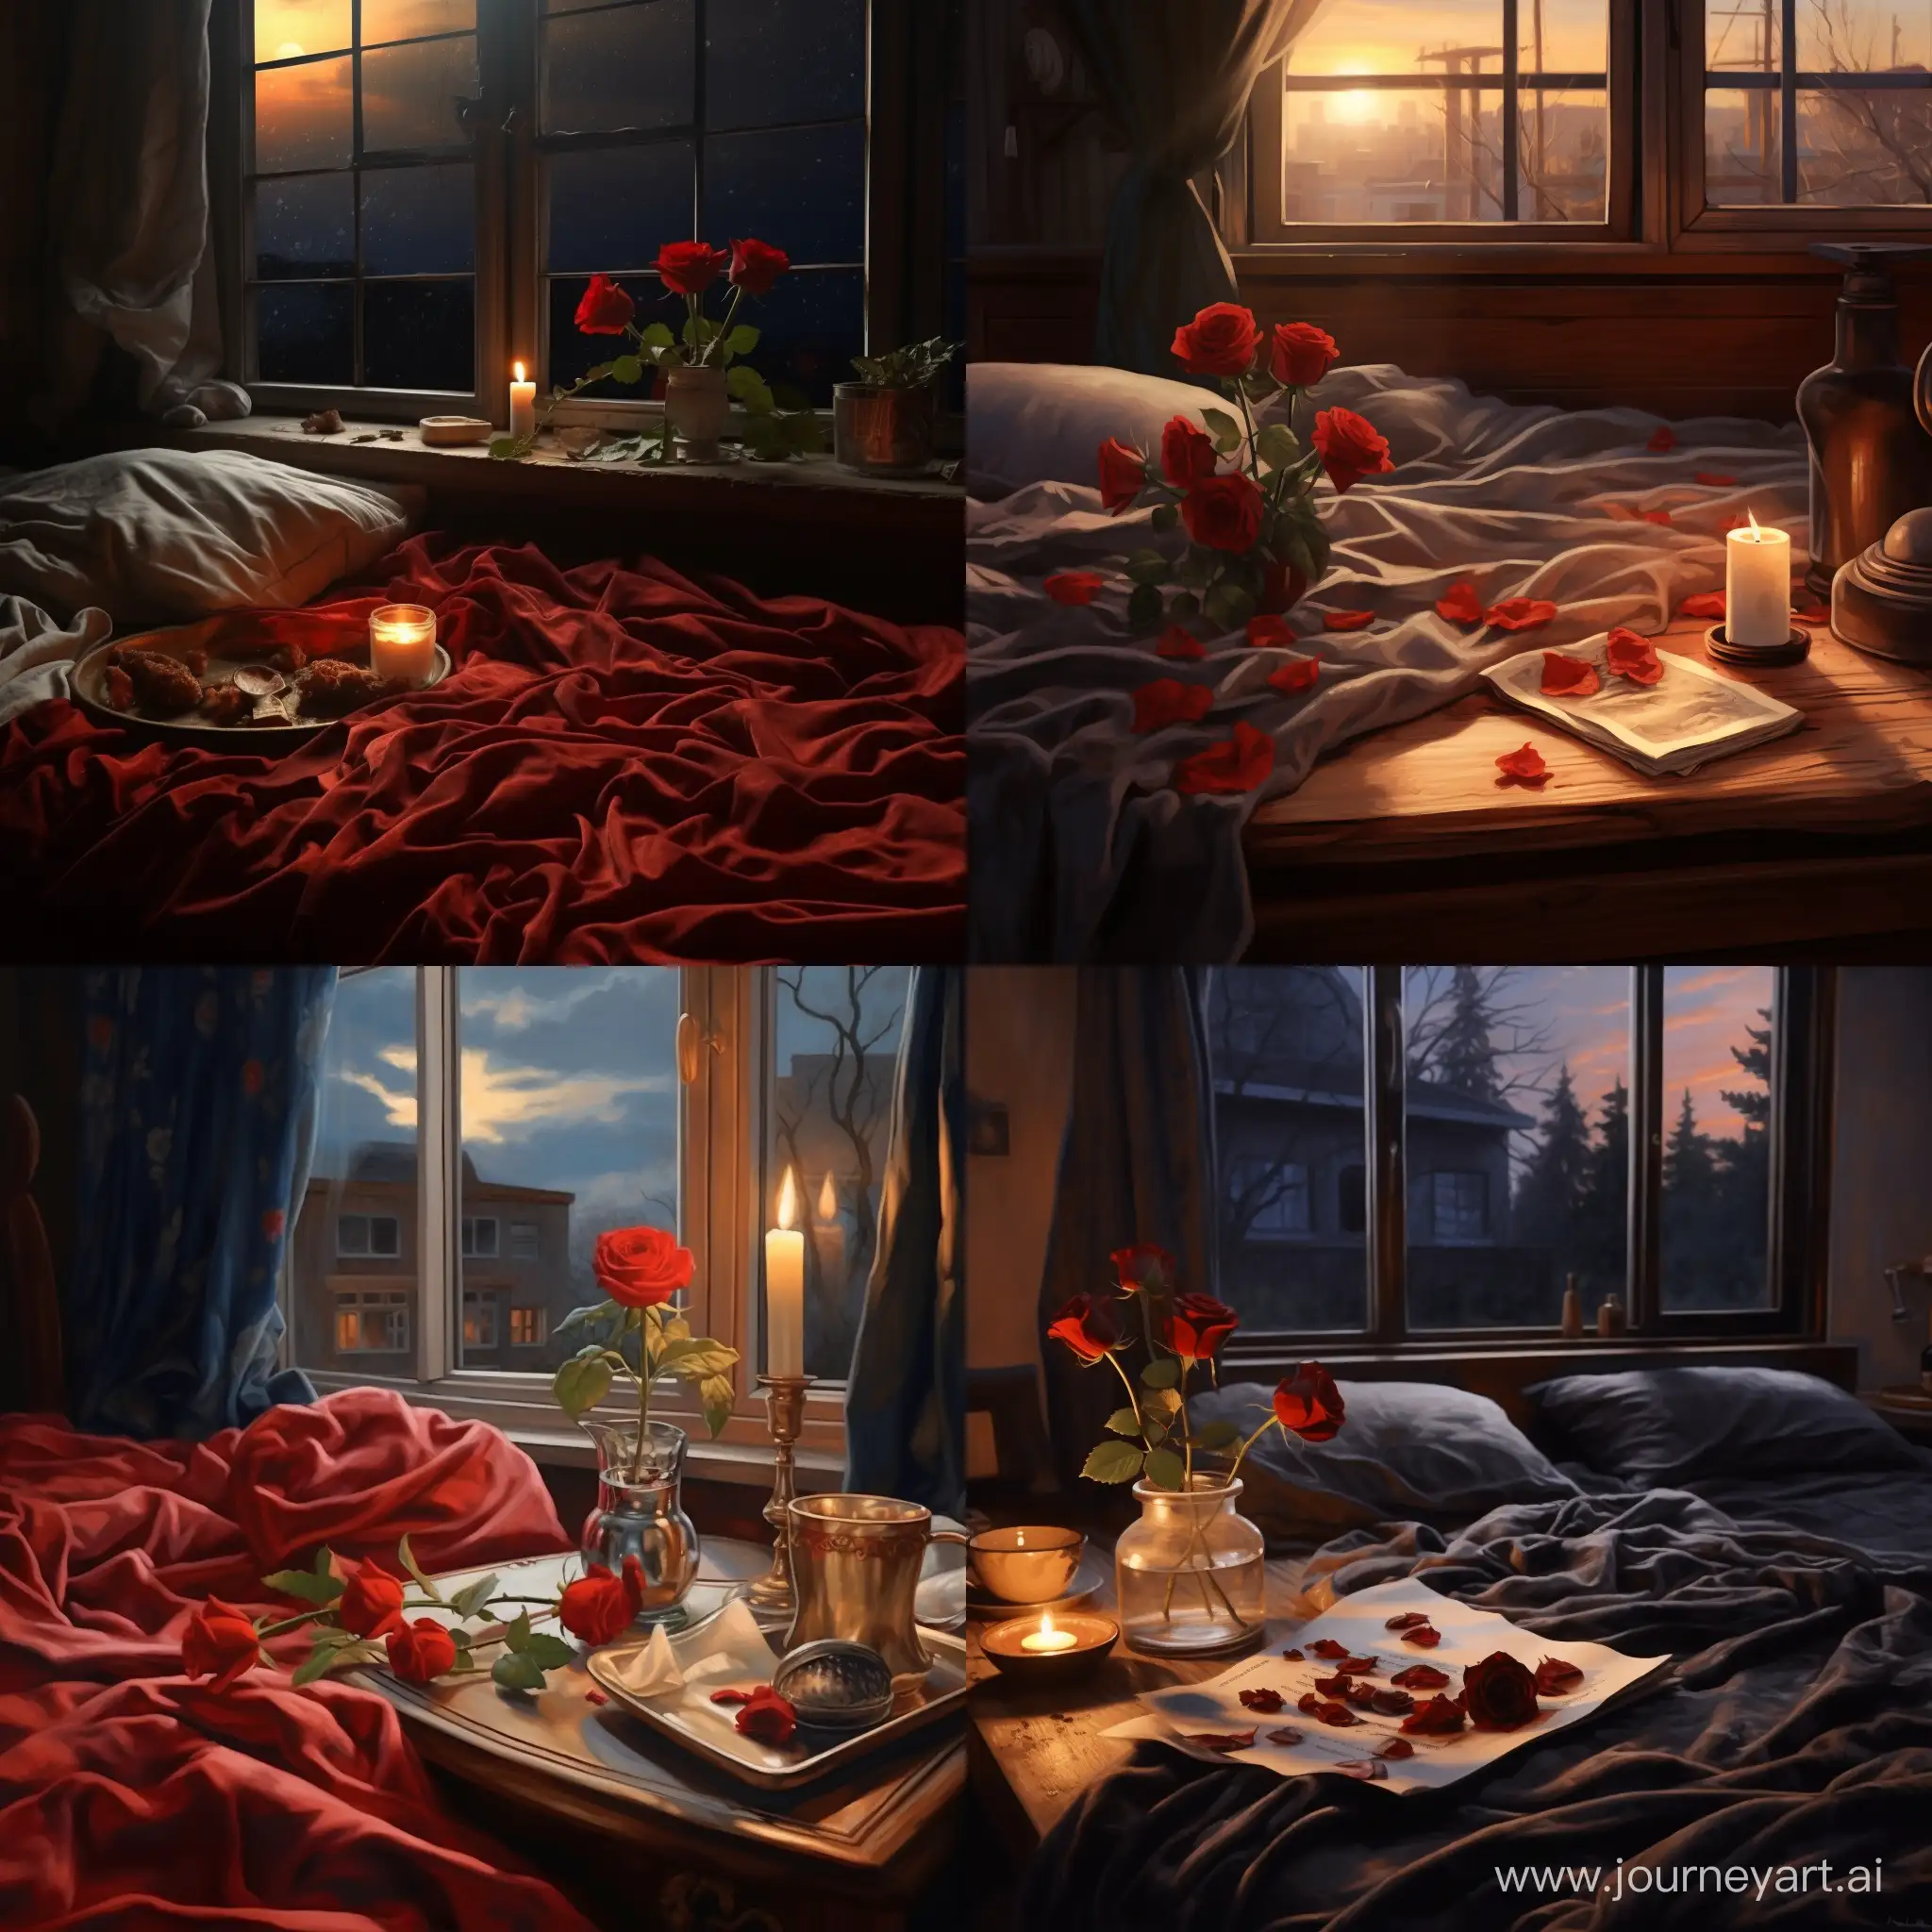 a rumpled bed, a red rose lies on the blanket, a candle is burning on the table, a window in the background, the night is in the window, realistic, beautiful, small details